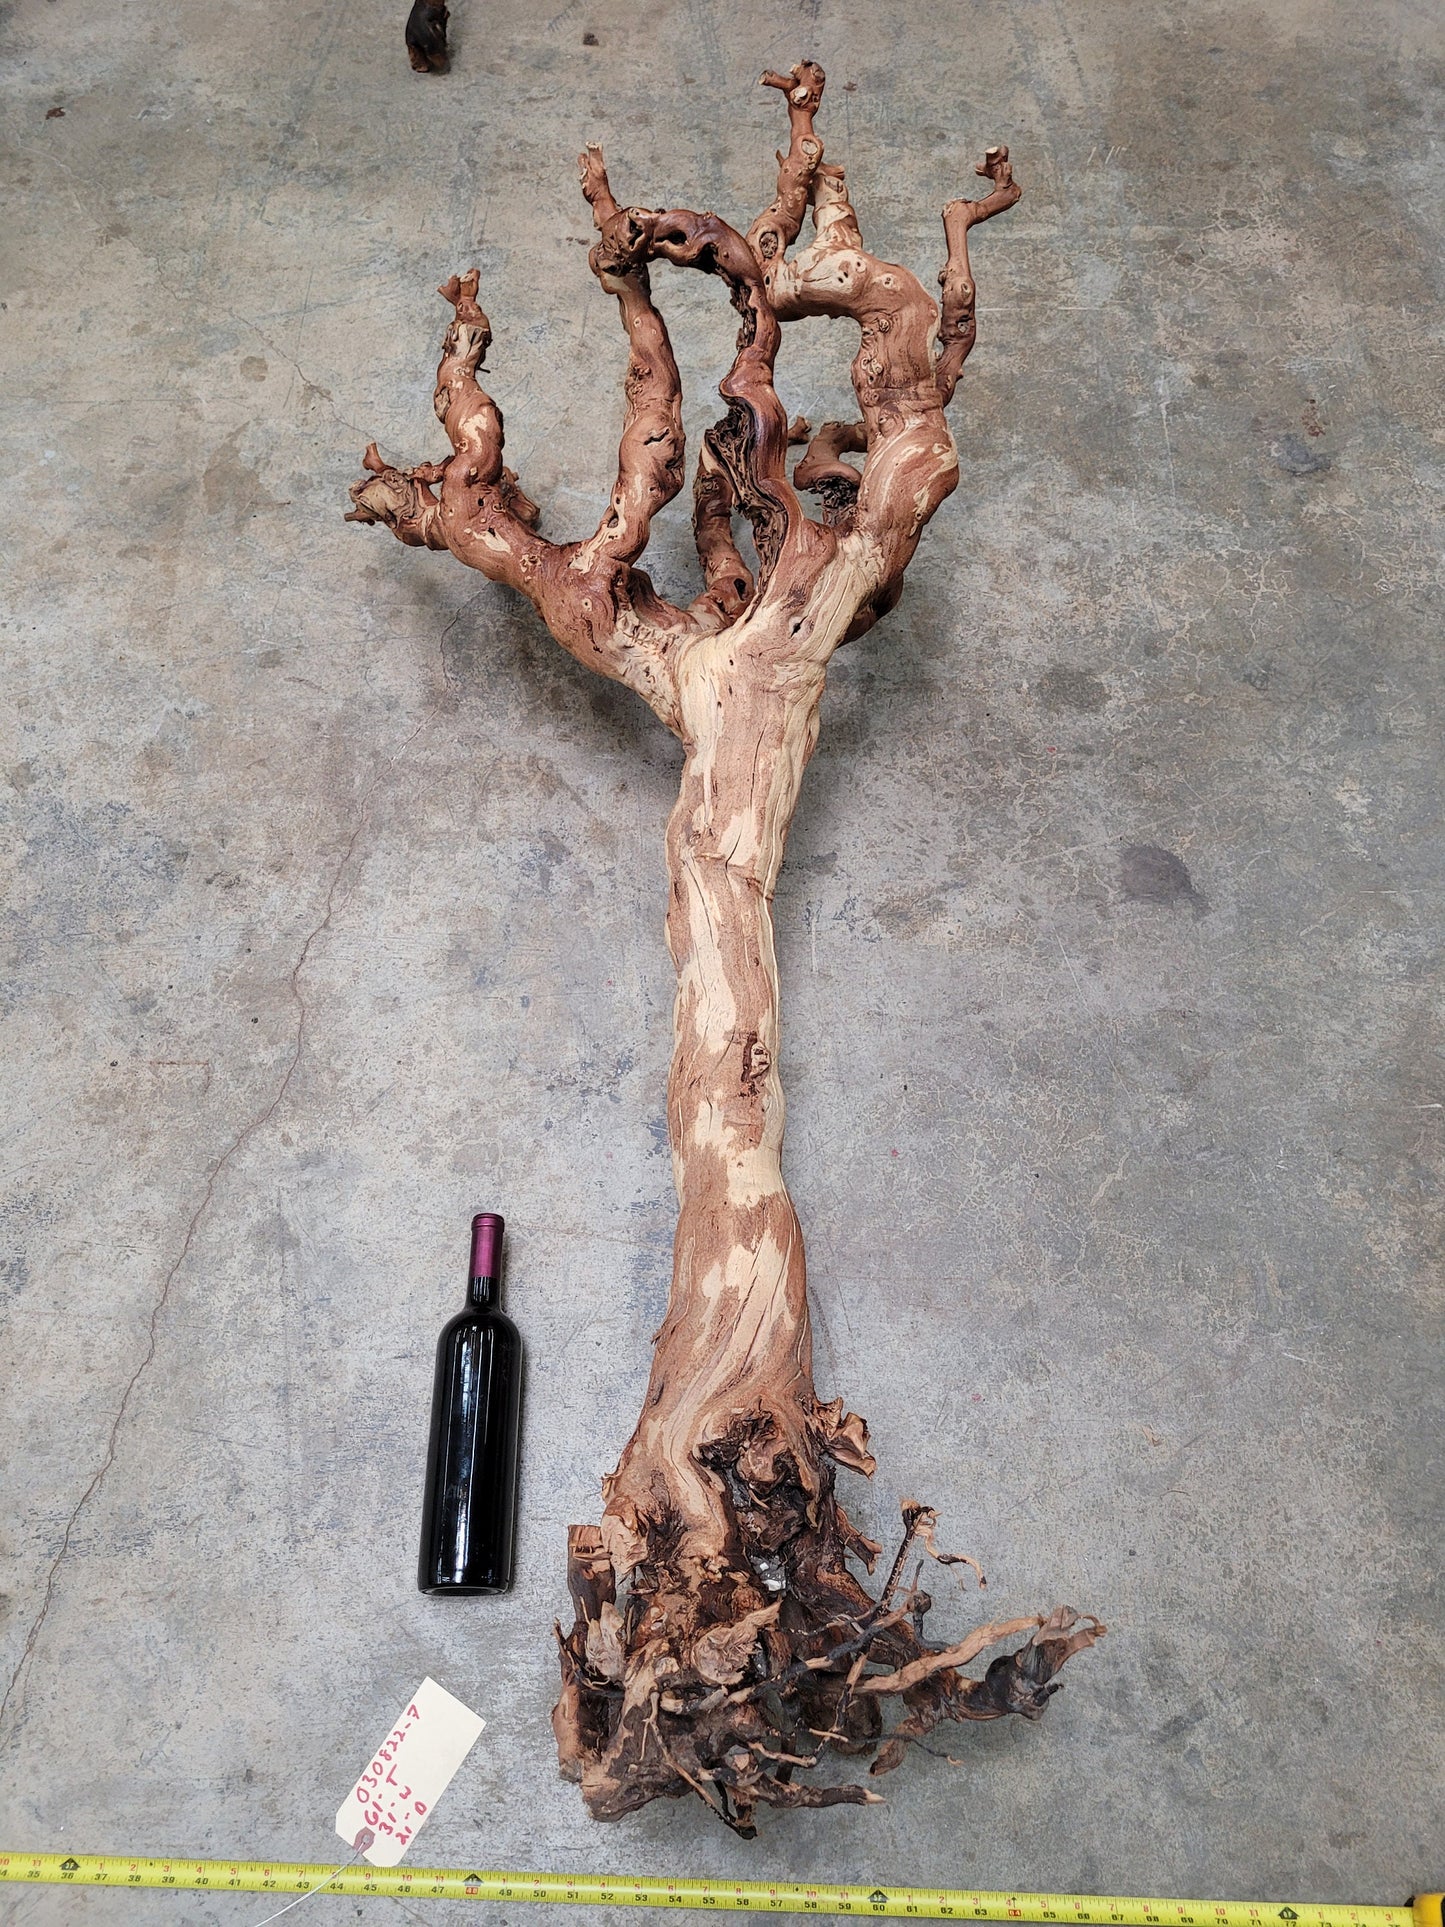 Zinfandel Old Grapevine Art From Turley Winery 100% Reclaimed + Ready to Ship!! 030822-7